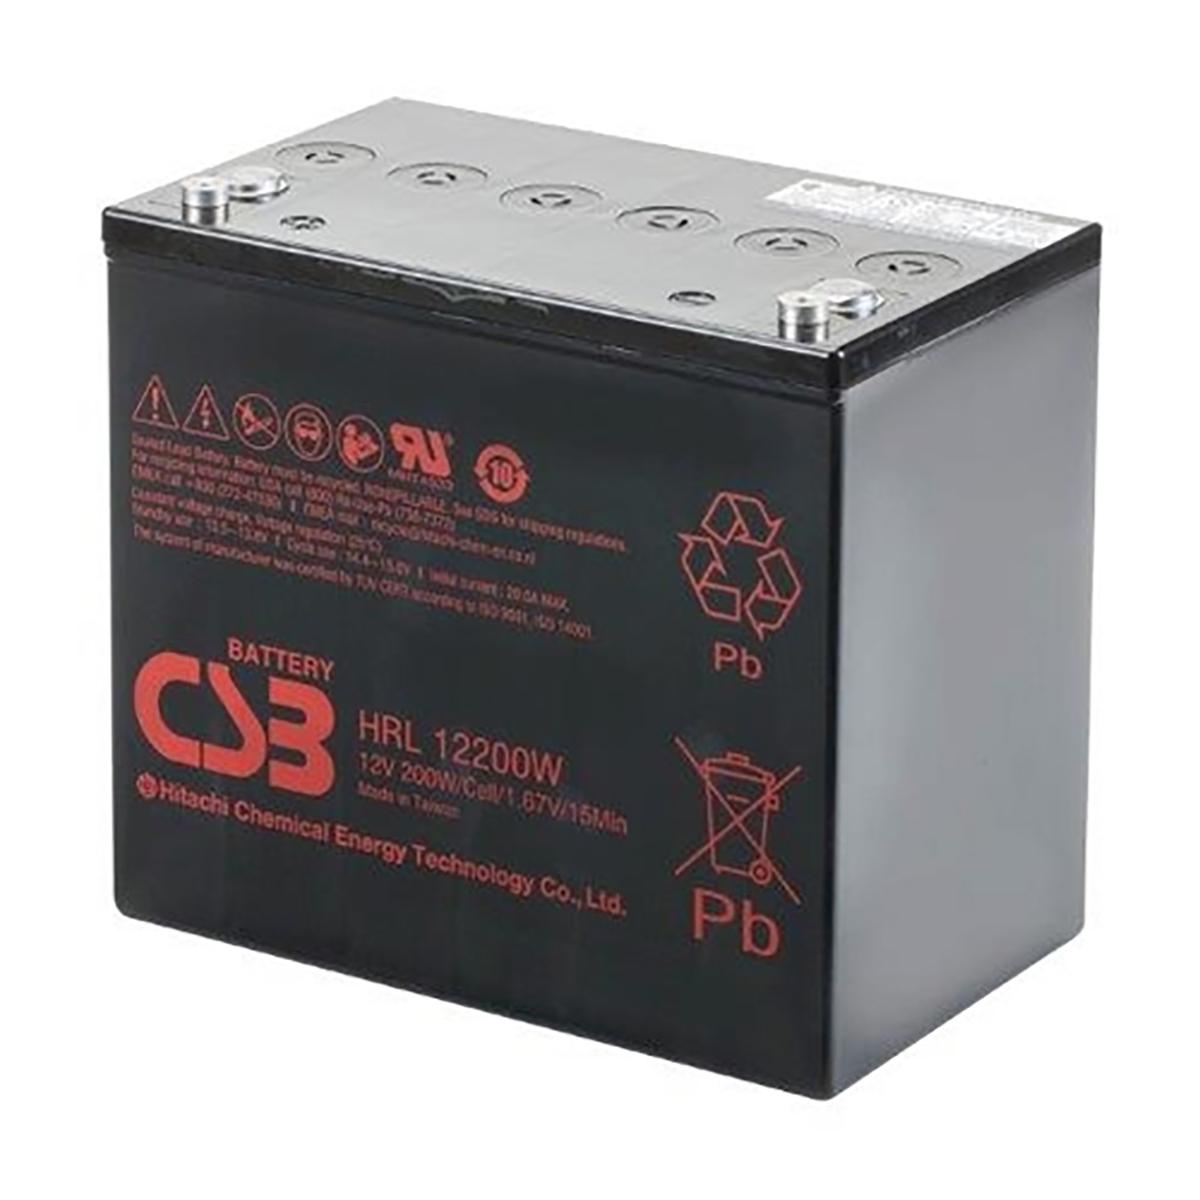 CSB Battery HR 1227W high-rate HR1227WF2 Batterie au plomb 12 V 6.2 Ah  plomb (AGM) (l x H x P) 90 x 106 x 70 mm cosses p - Conrad Electronic France